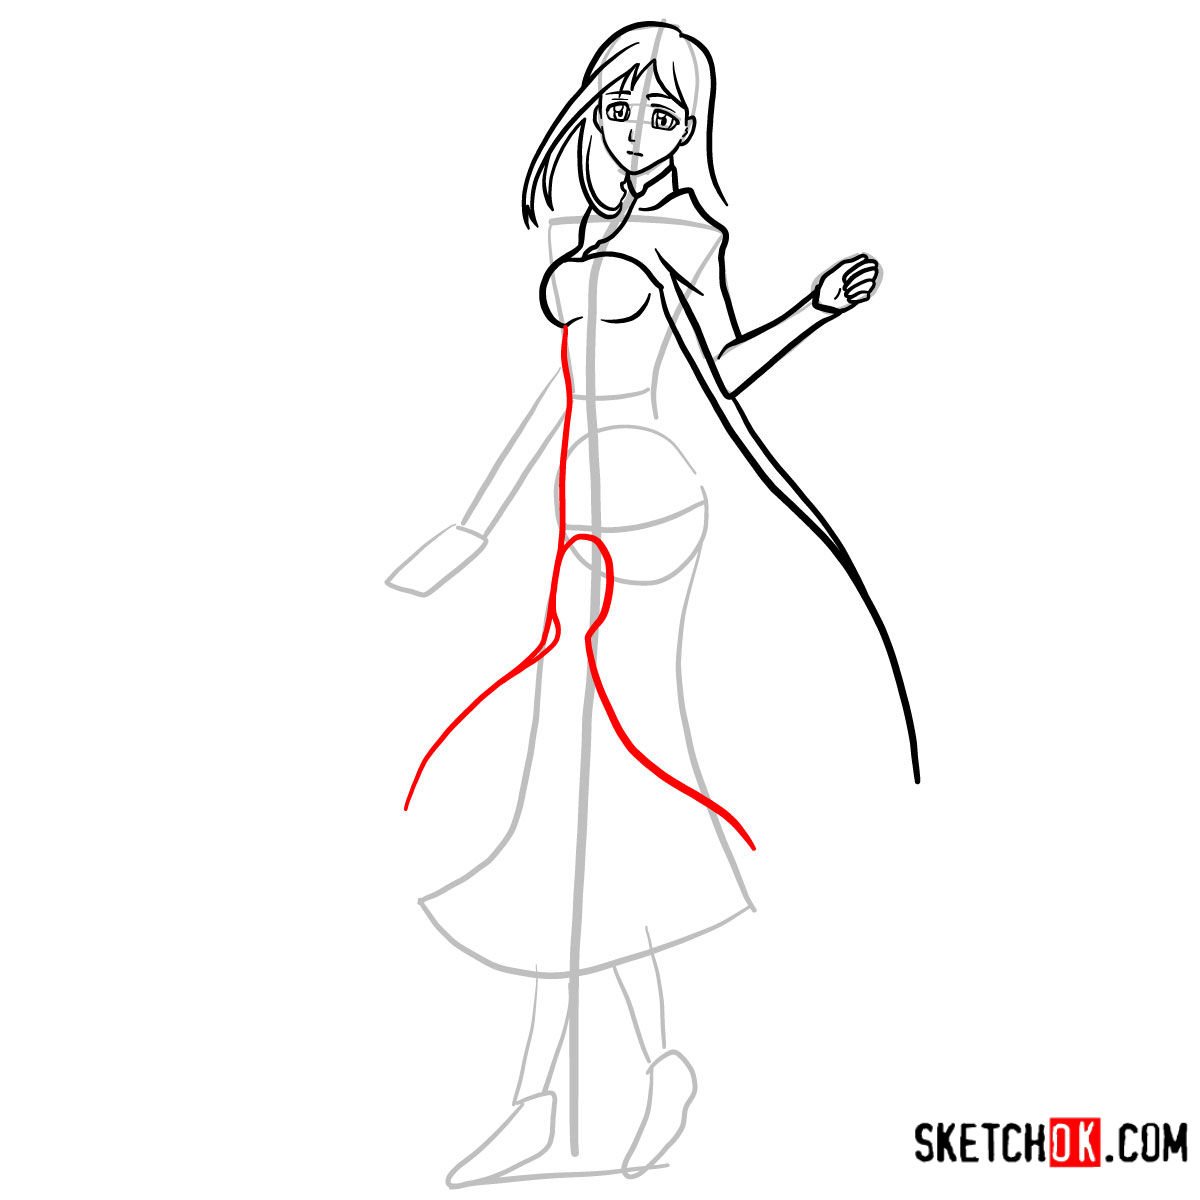 How to draw Orihime Inoue full growth | Bleach - step 09